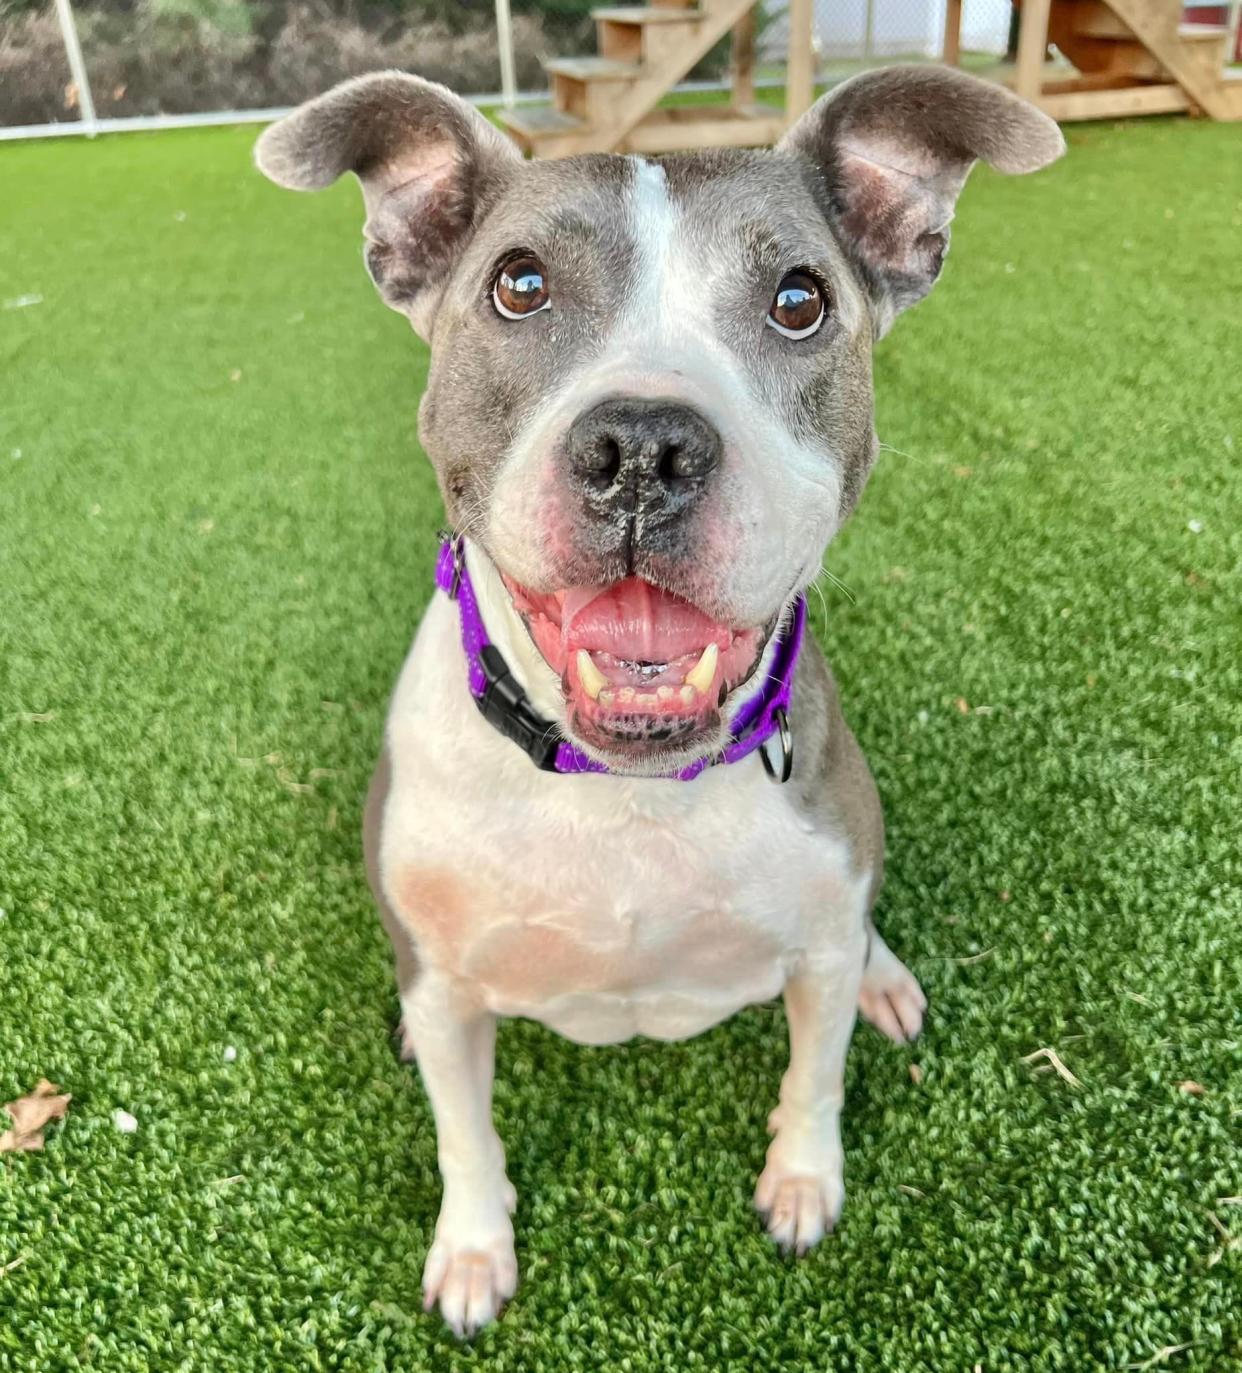 Gracie, a 9-year-old Pit Bull mix, is trained, friendly, and available for adoption at the Monmouth County SPCA in Eatontown.